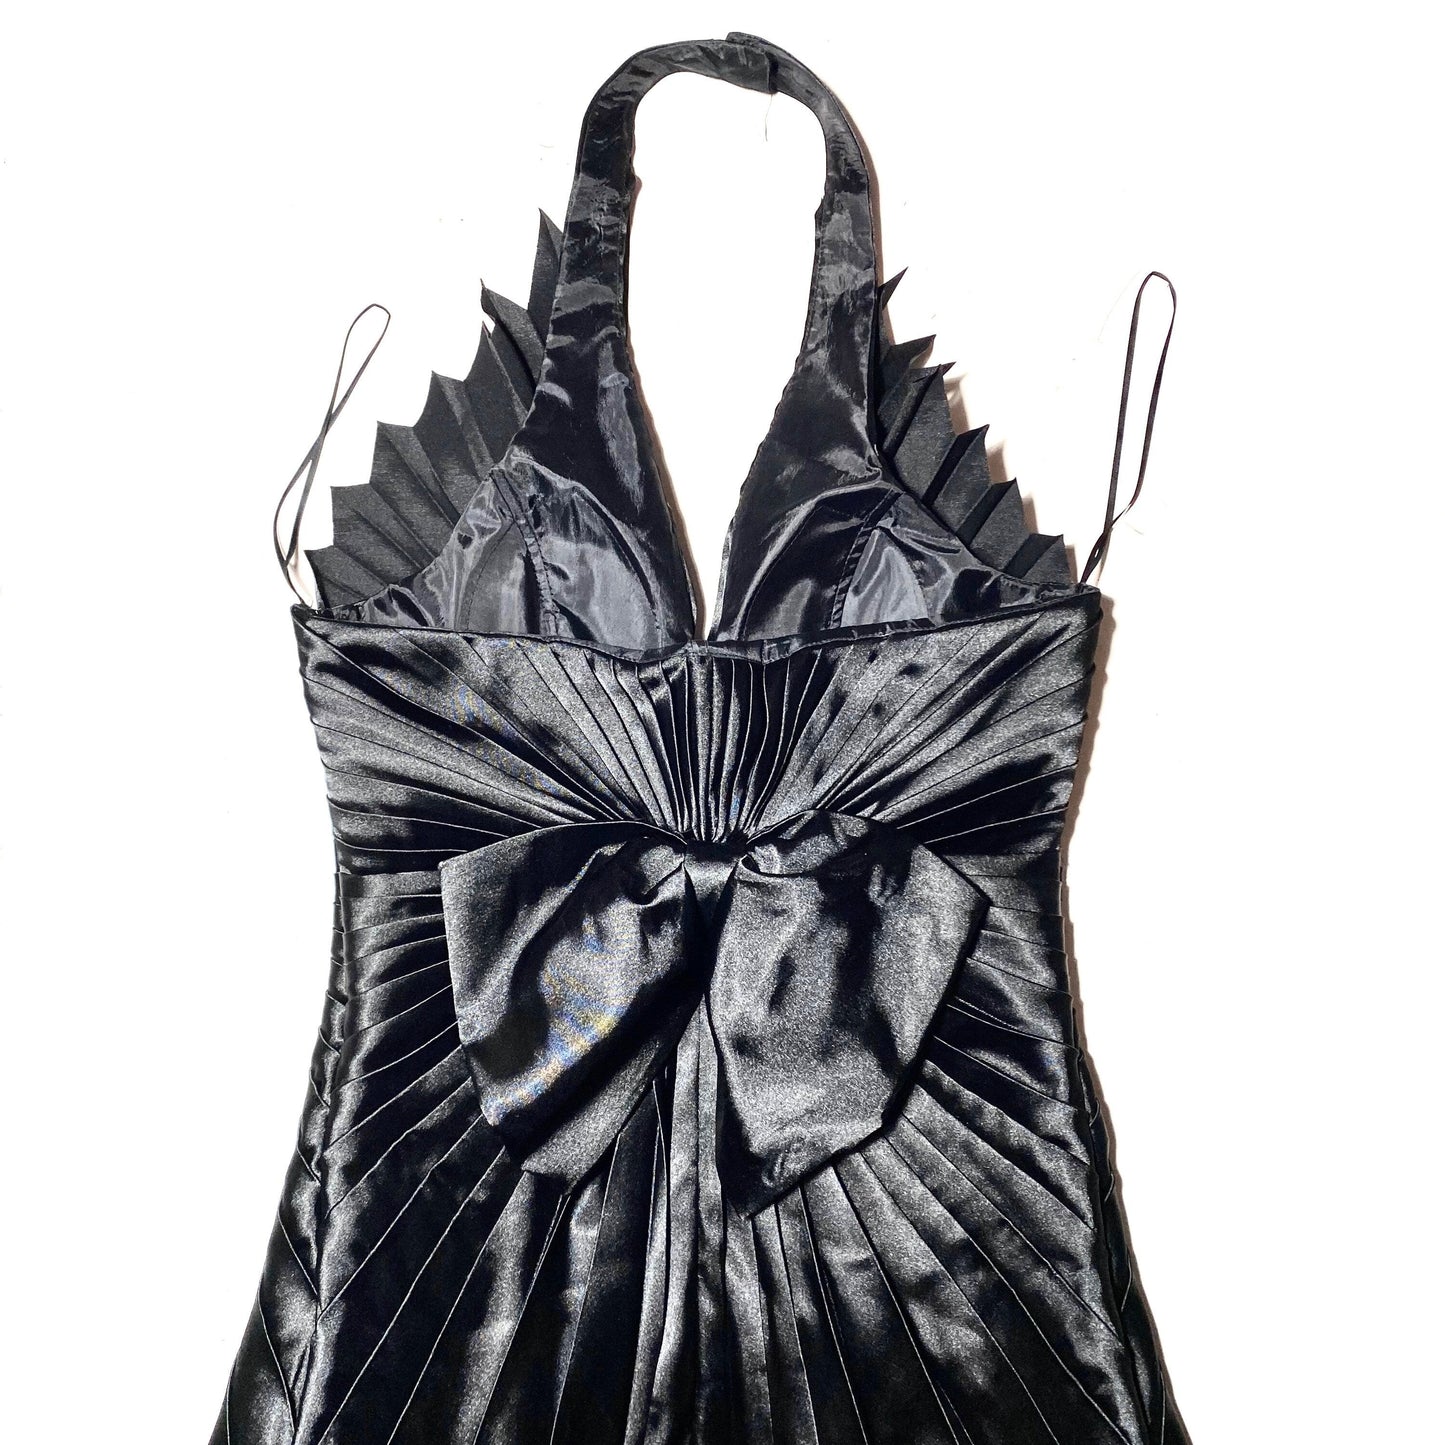 Lissa long black satin pleated party dress with rhinestones and rhombus embroidery at waist, NOS 80s Italy